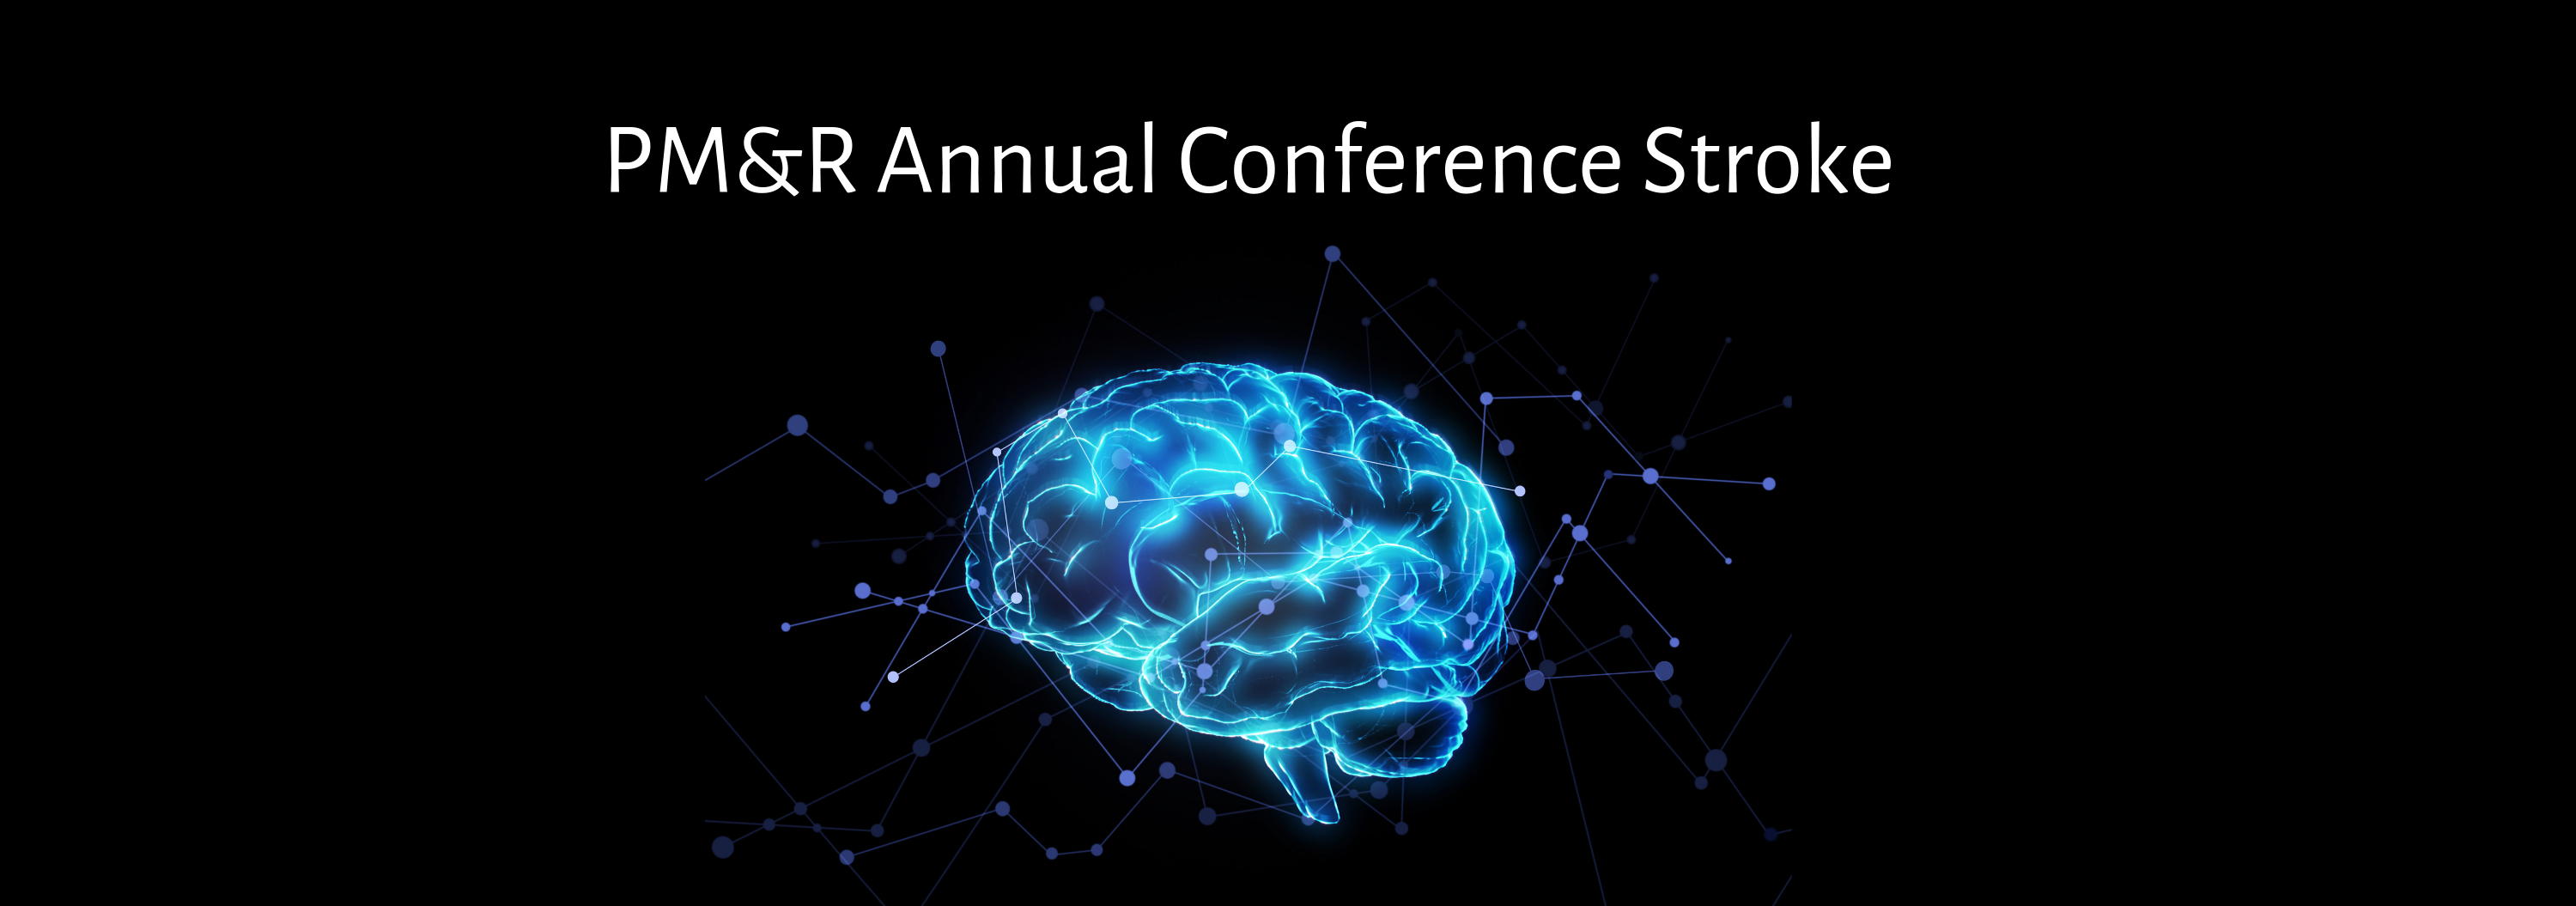 2019 PM&R Annual Conference: Enhancing Outcomes in Stroke Rehabilitation and Recovery Banner